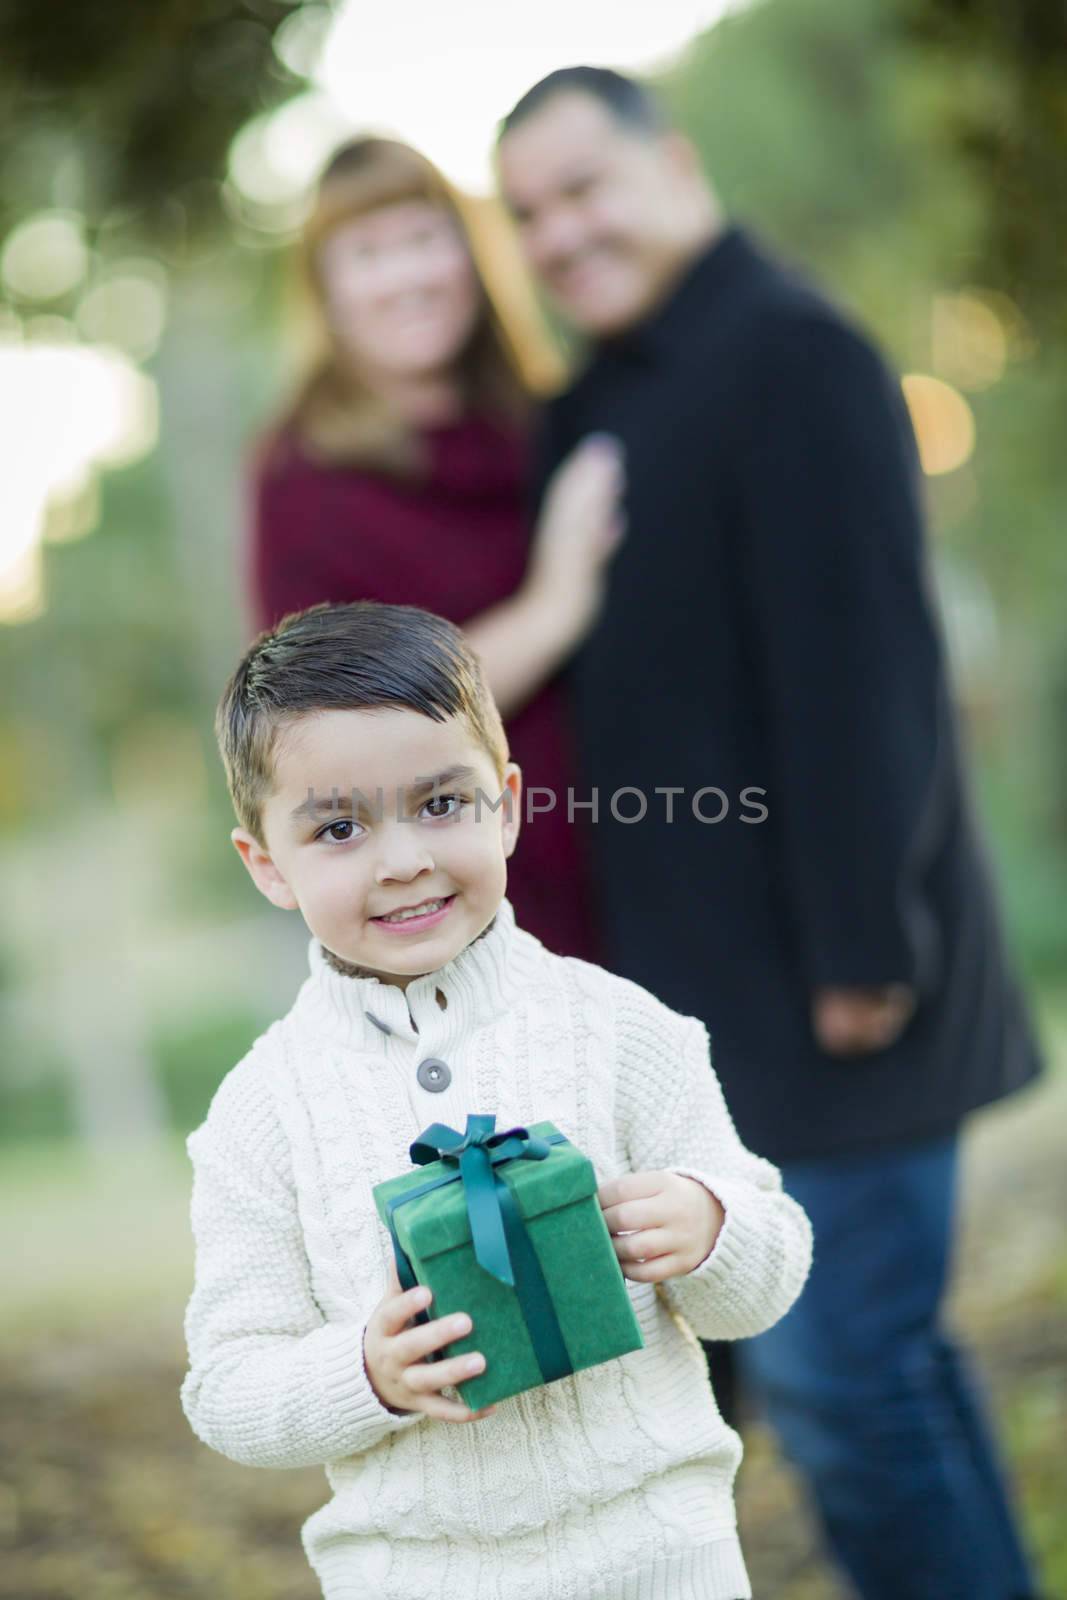 Young Mixed Race Boy Holding Gift In Front with Parents Behind.